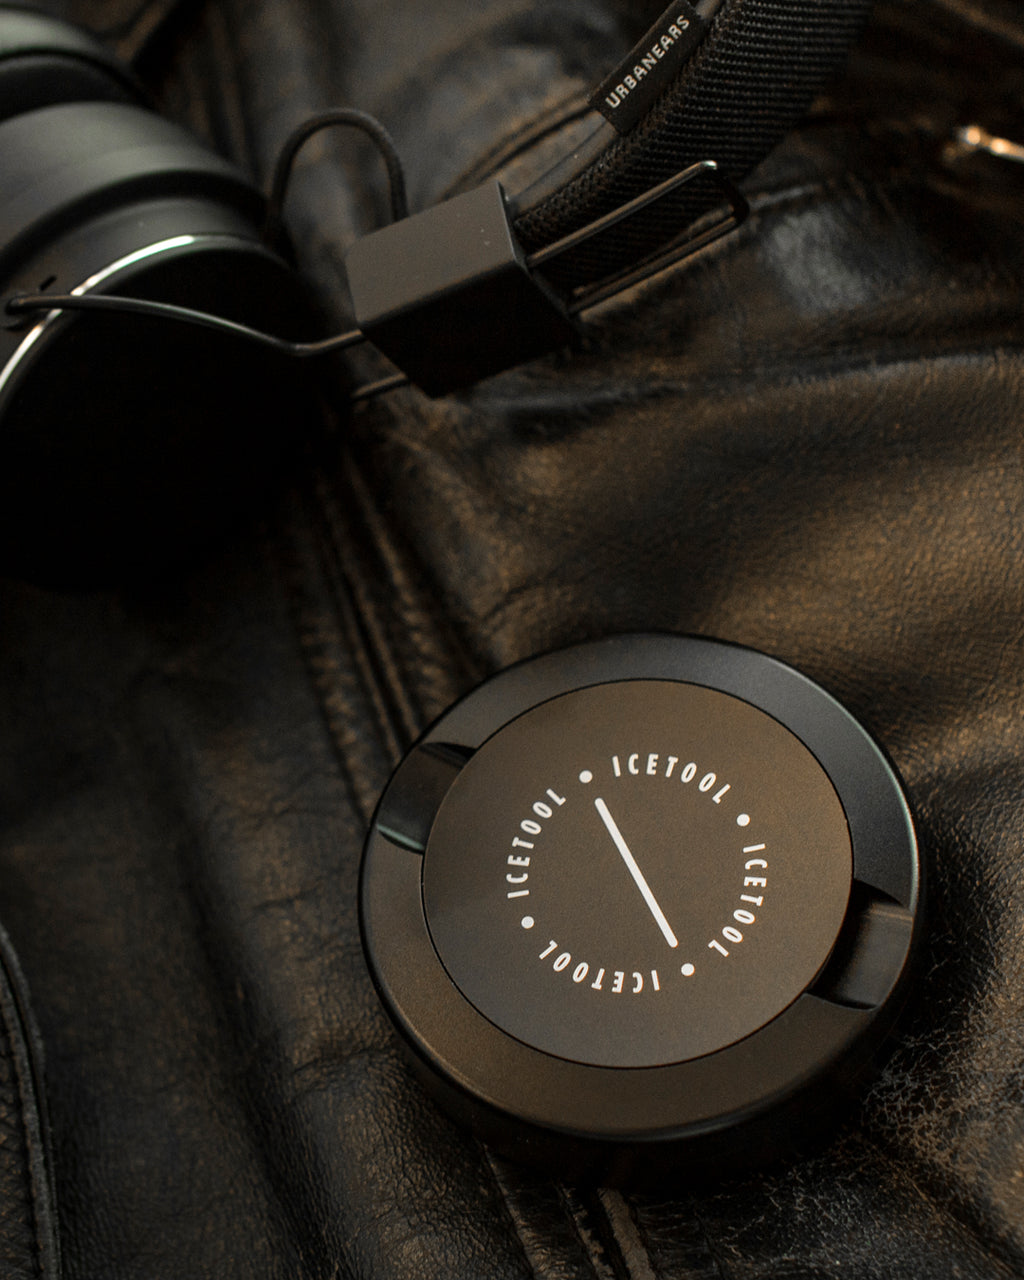 The Ultimate EDC Gear for snus and nicotine pouch users by Icetool –  Icetool snus accessories